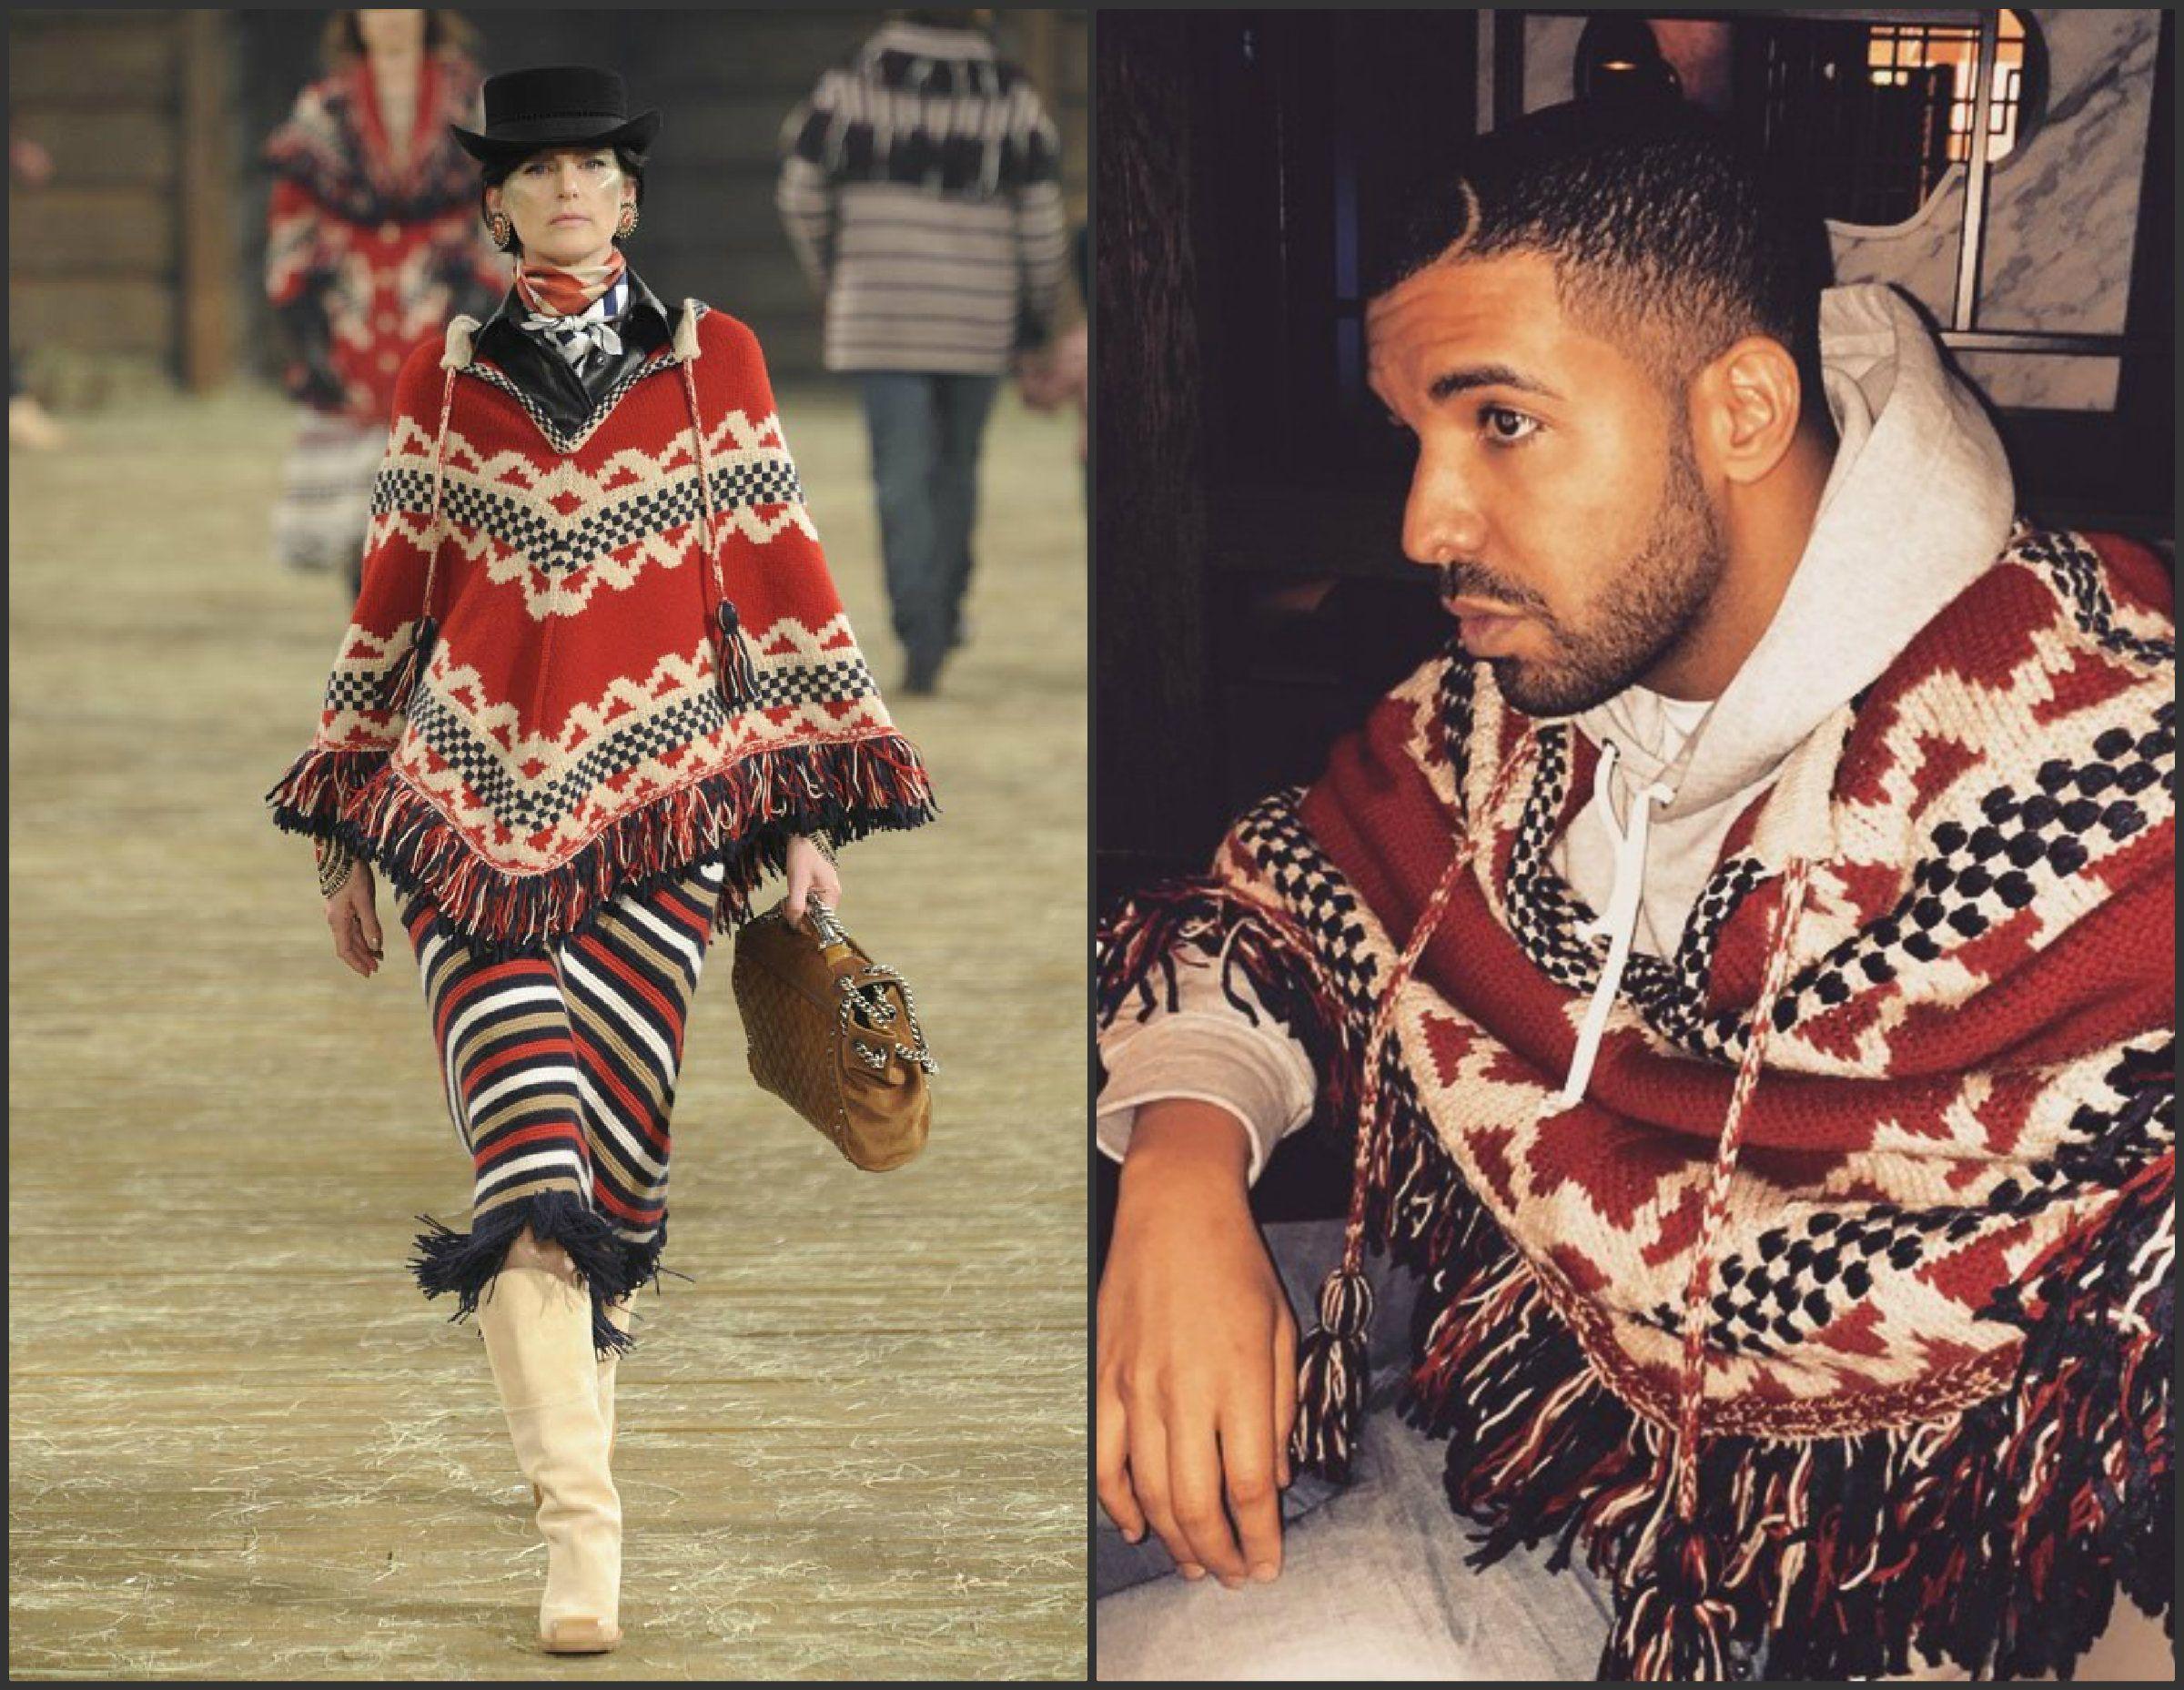 ❤️ New iconic Chanel fringed poncho from Runway of Paris / DALLAS Collection.
As seen on Christen Stewart, Drake and fashion influencer Anna Dello Russo!
✨CC logo charm at side
️ Size mark: 38 fr
 Condition: NEVER WORN.